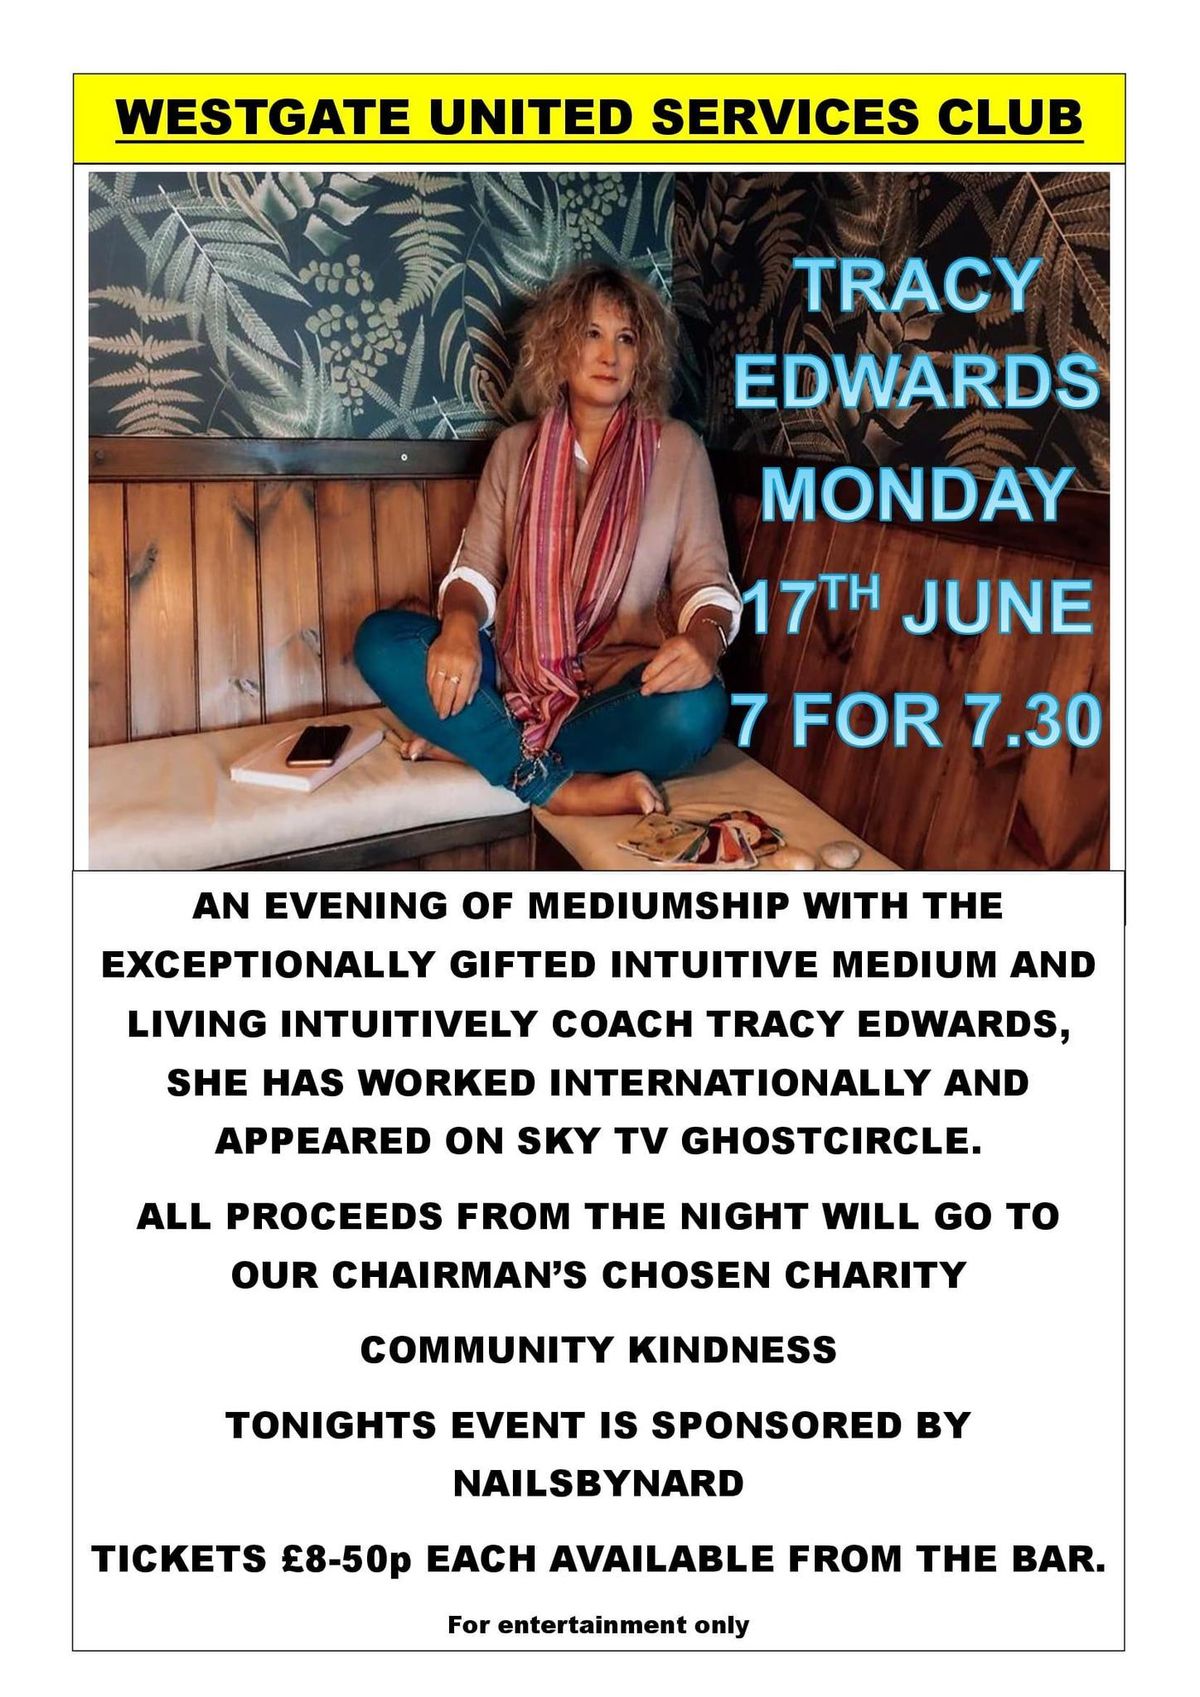 Psychic Night with Tracy Edwards in aid of Community Kindness Charity